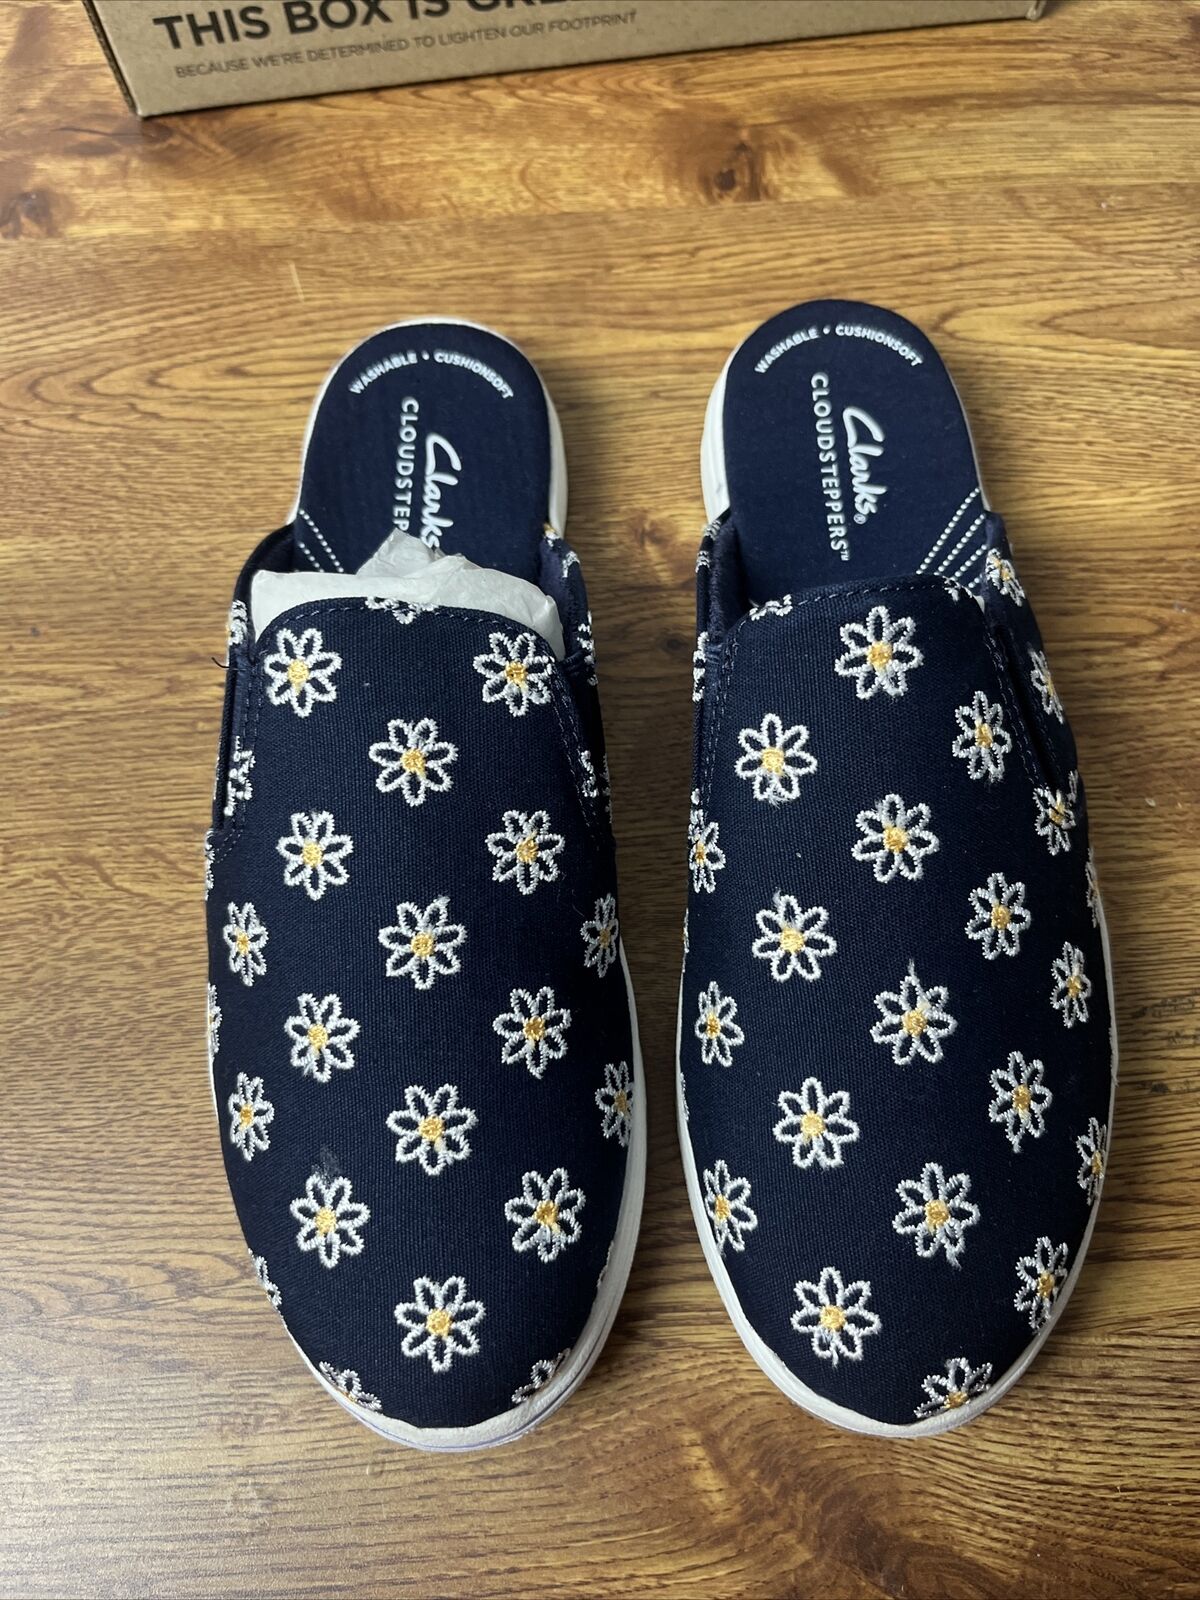 CLARKS Cloudsteppers Canvas Slip-on Mules Breeze Shore Navy Floral 7.5M NEW